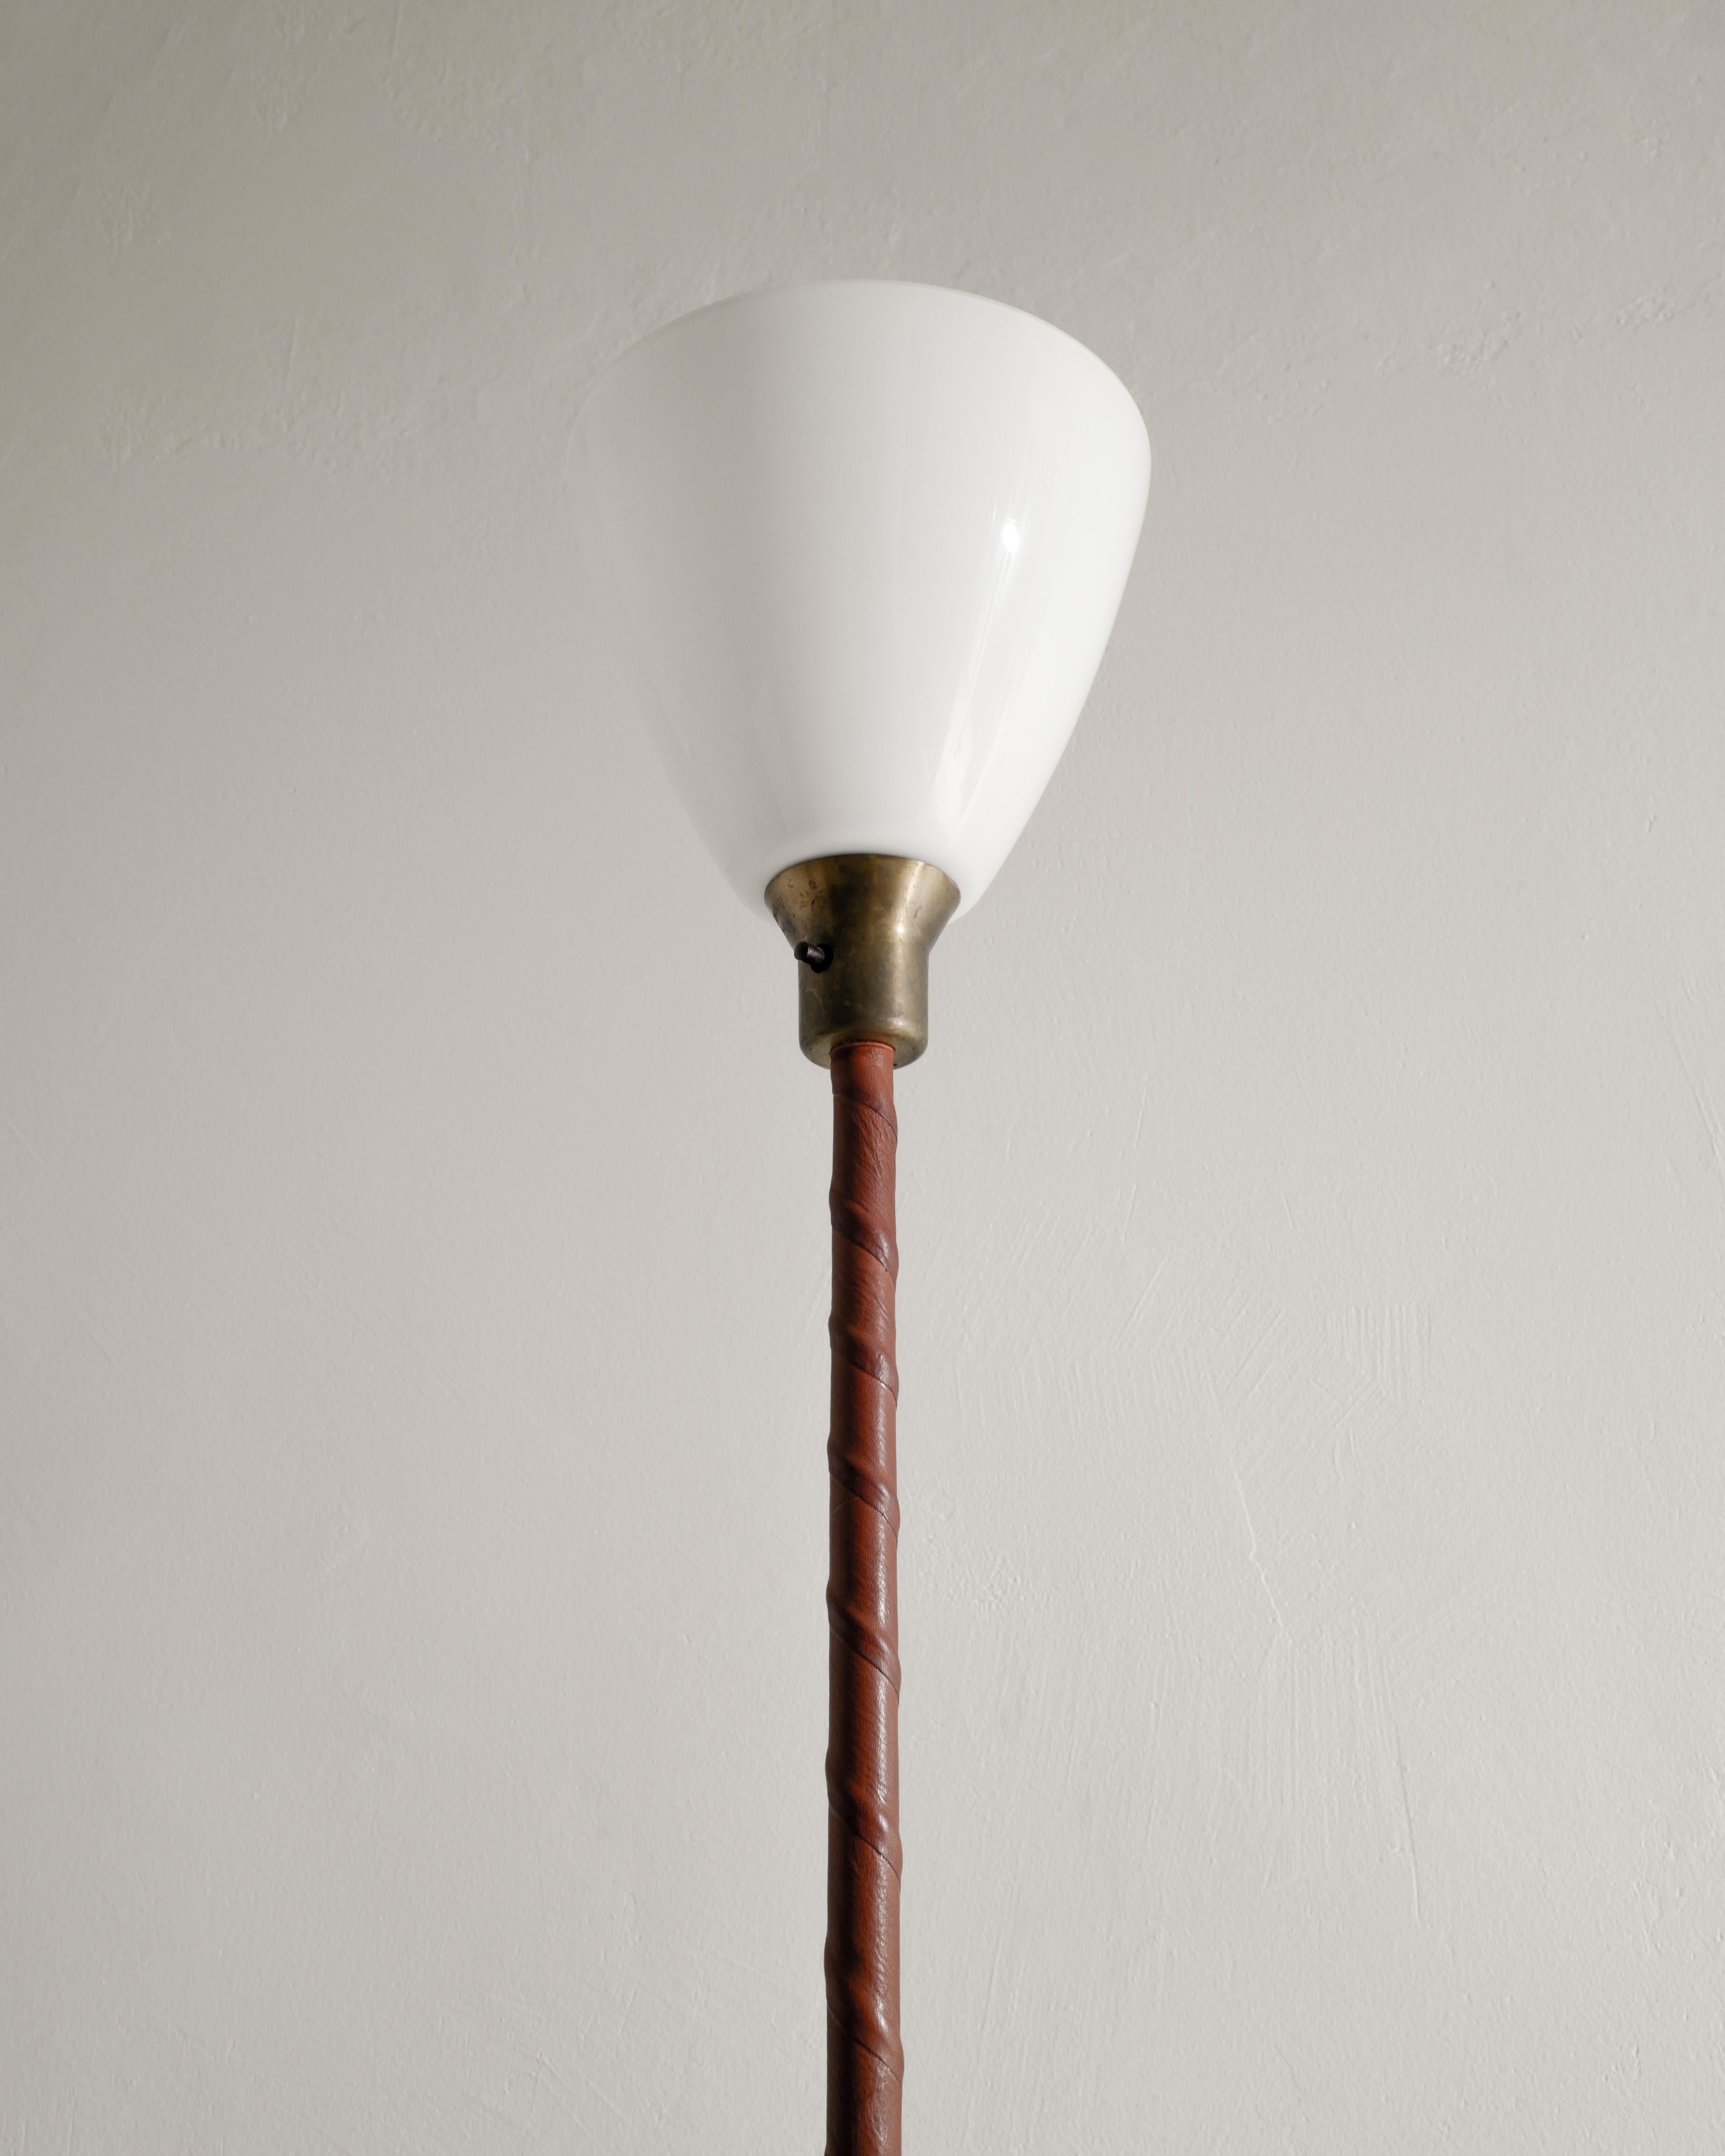 Mid-20th Century Swedish Mid Century Brass, Leather & Glass Uplight Floor Lamp Produced, 1950s For Sale